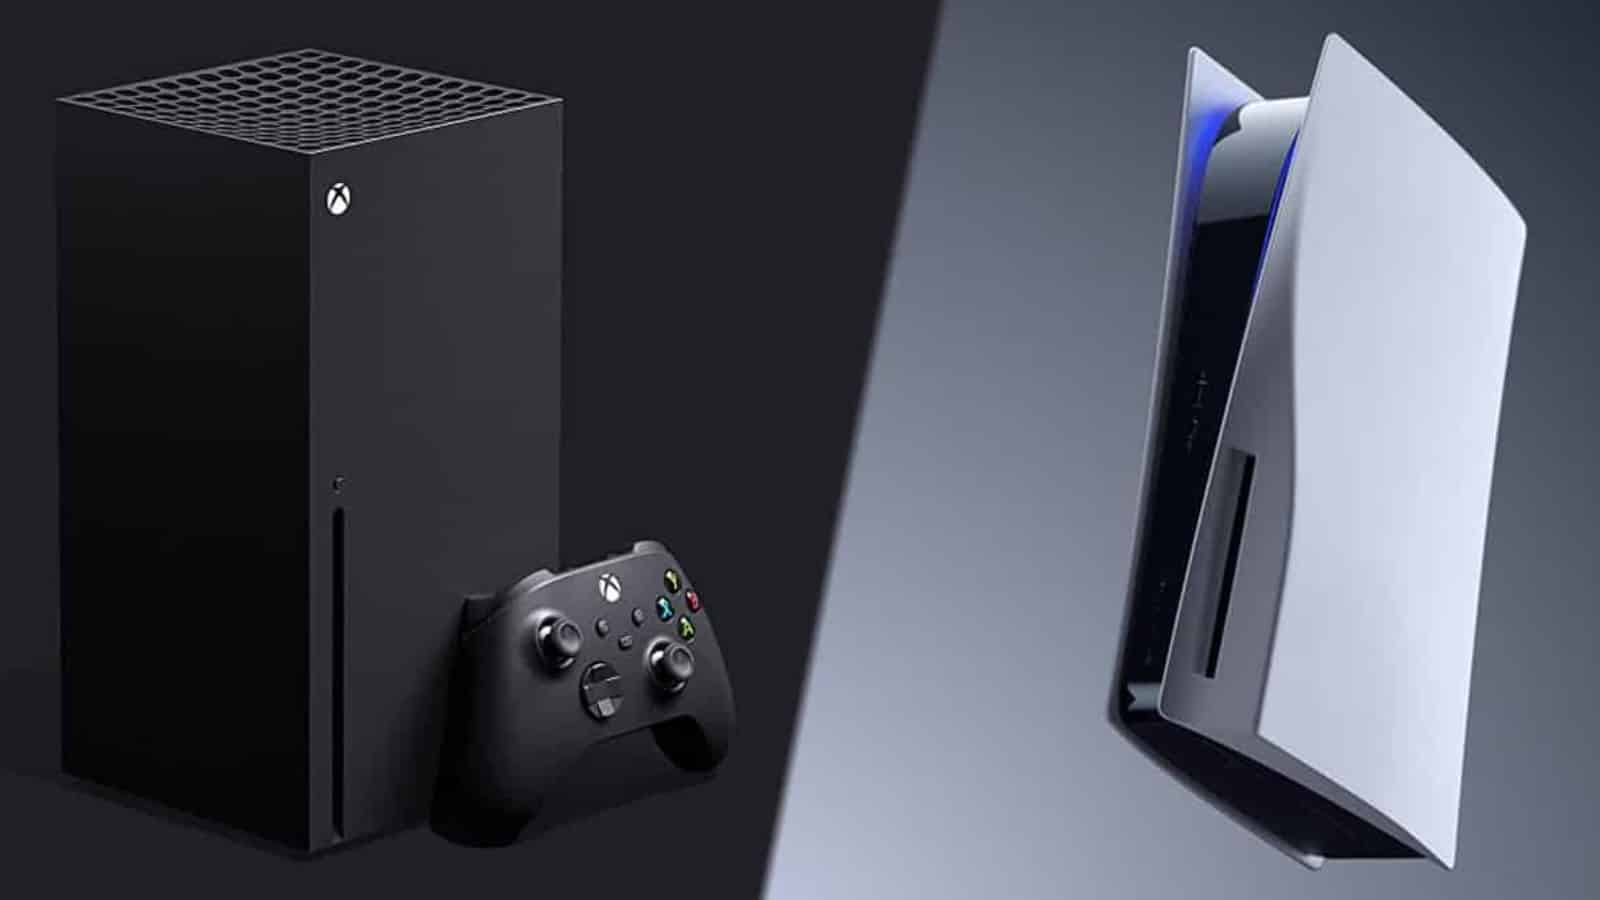 PS5 Pro And New Xbox Series S/X Coming In 2023/2024 (GPU roughly